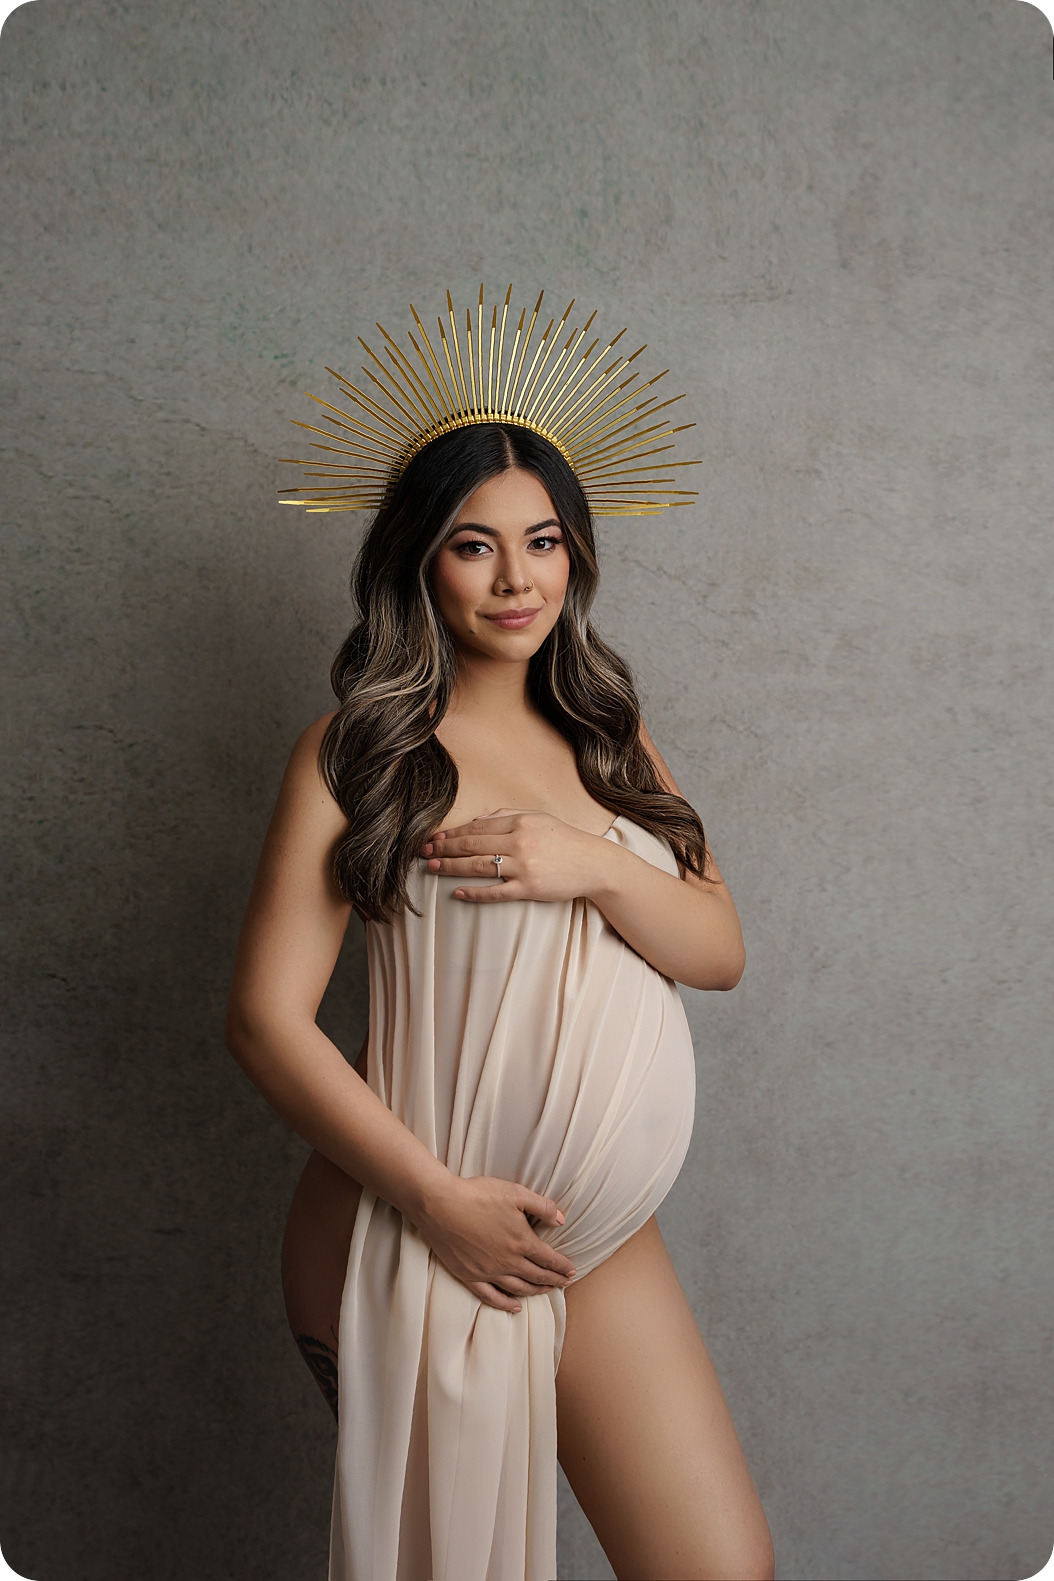 pregnant woman wears crown with gold spikes during fashion maternity photos in Utah 